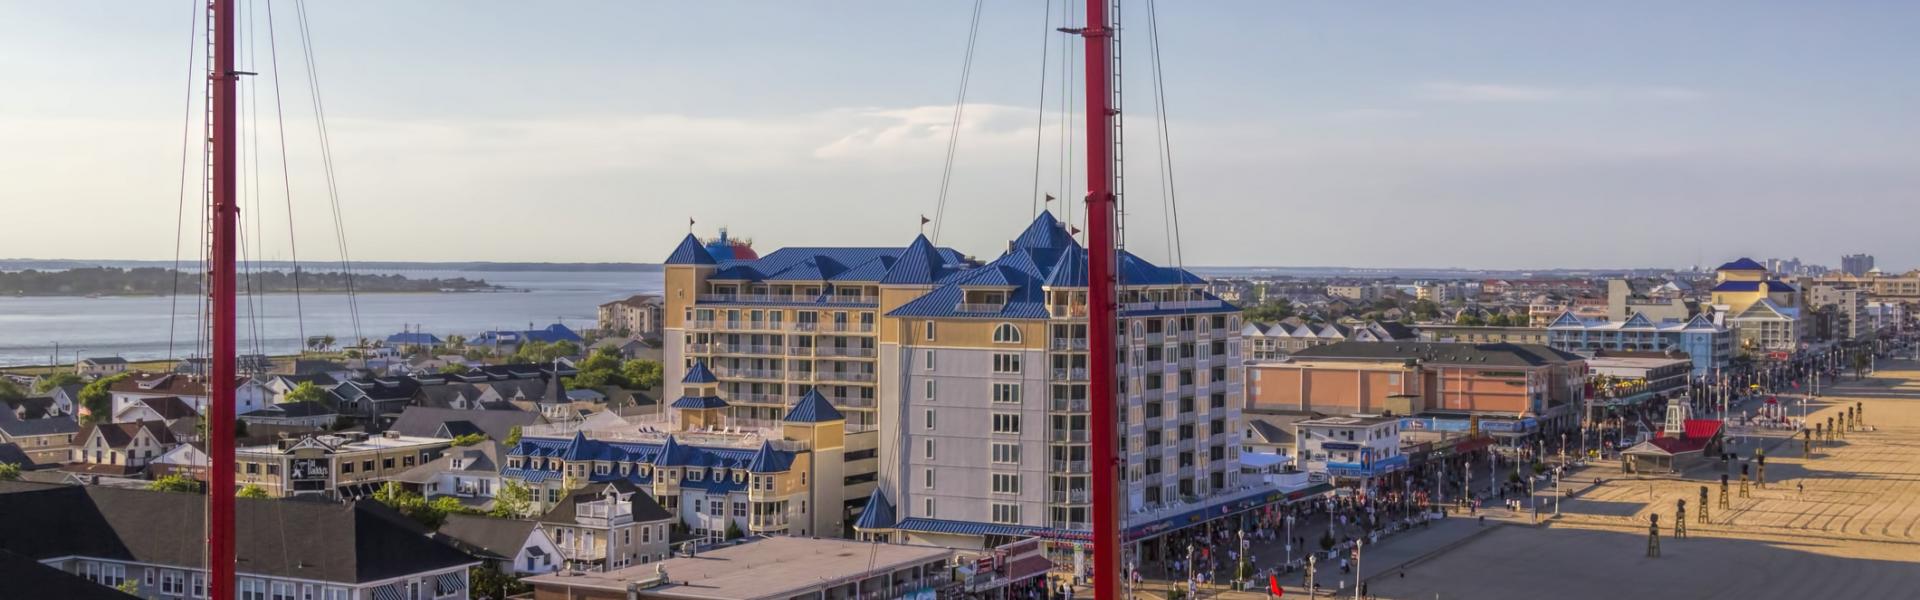 Hotels and Vacation Rentals Near the Ocean City Boardwalk - HomeToGo